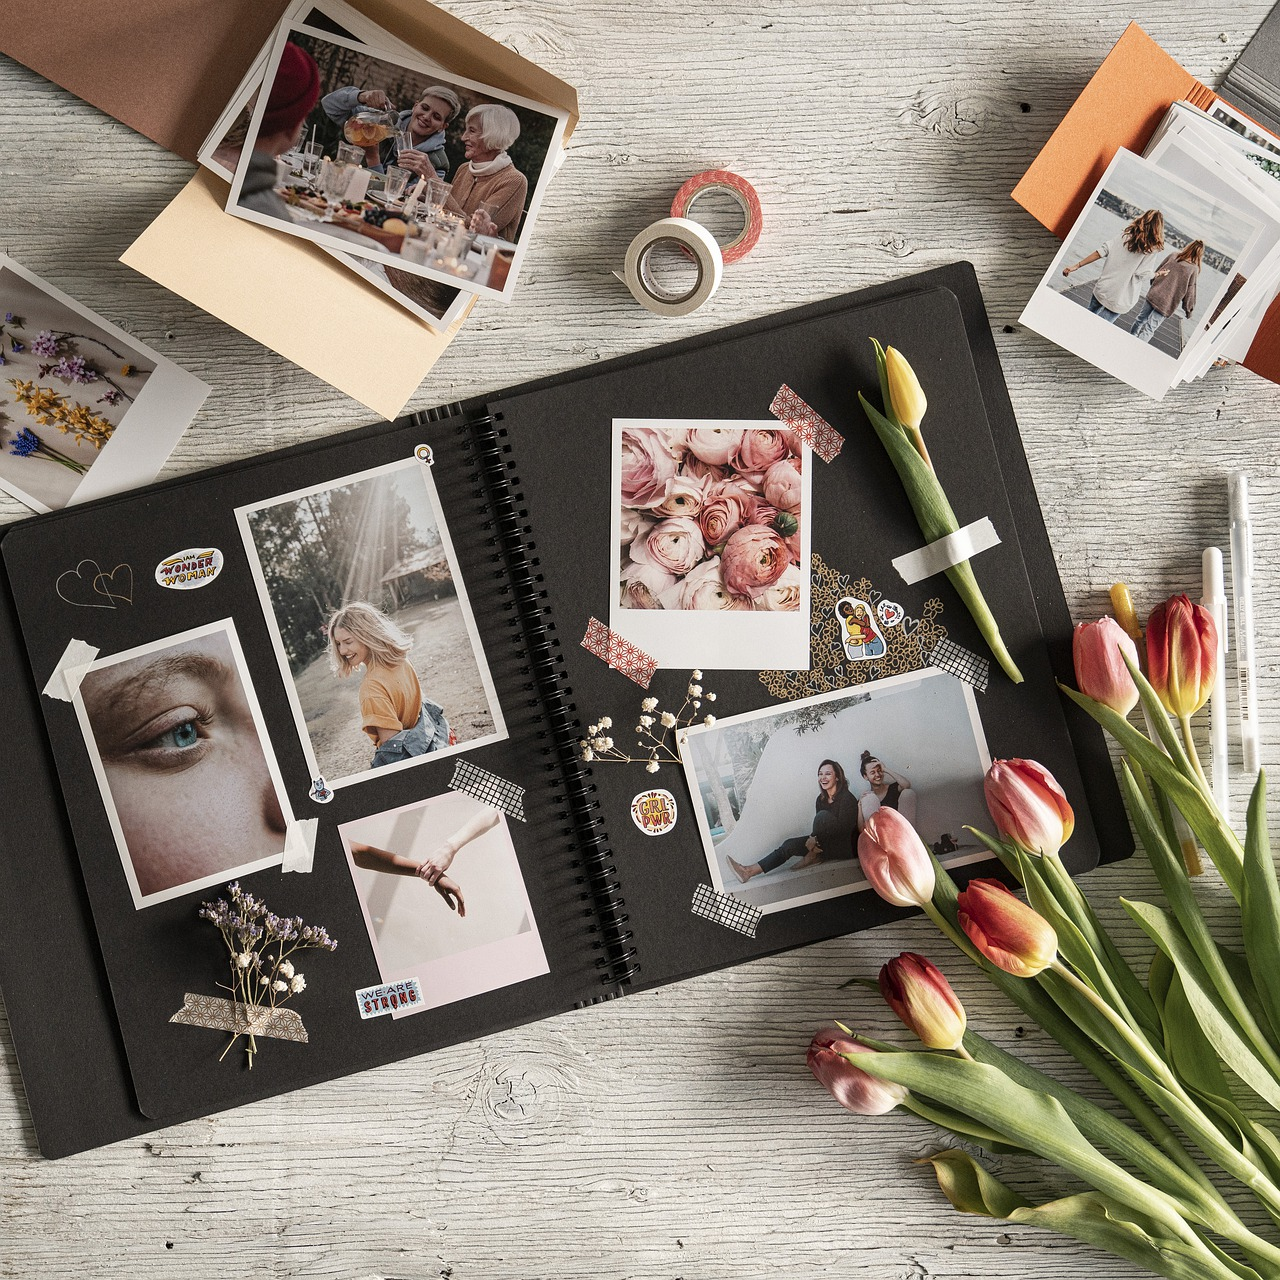 an overhead shot of a dark photo album showing multiple photos next to flowers and rolls of tape